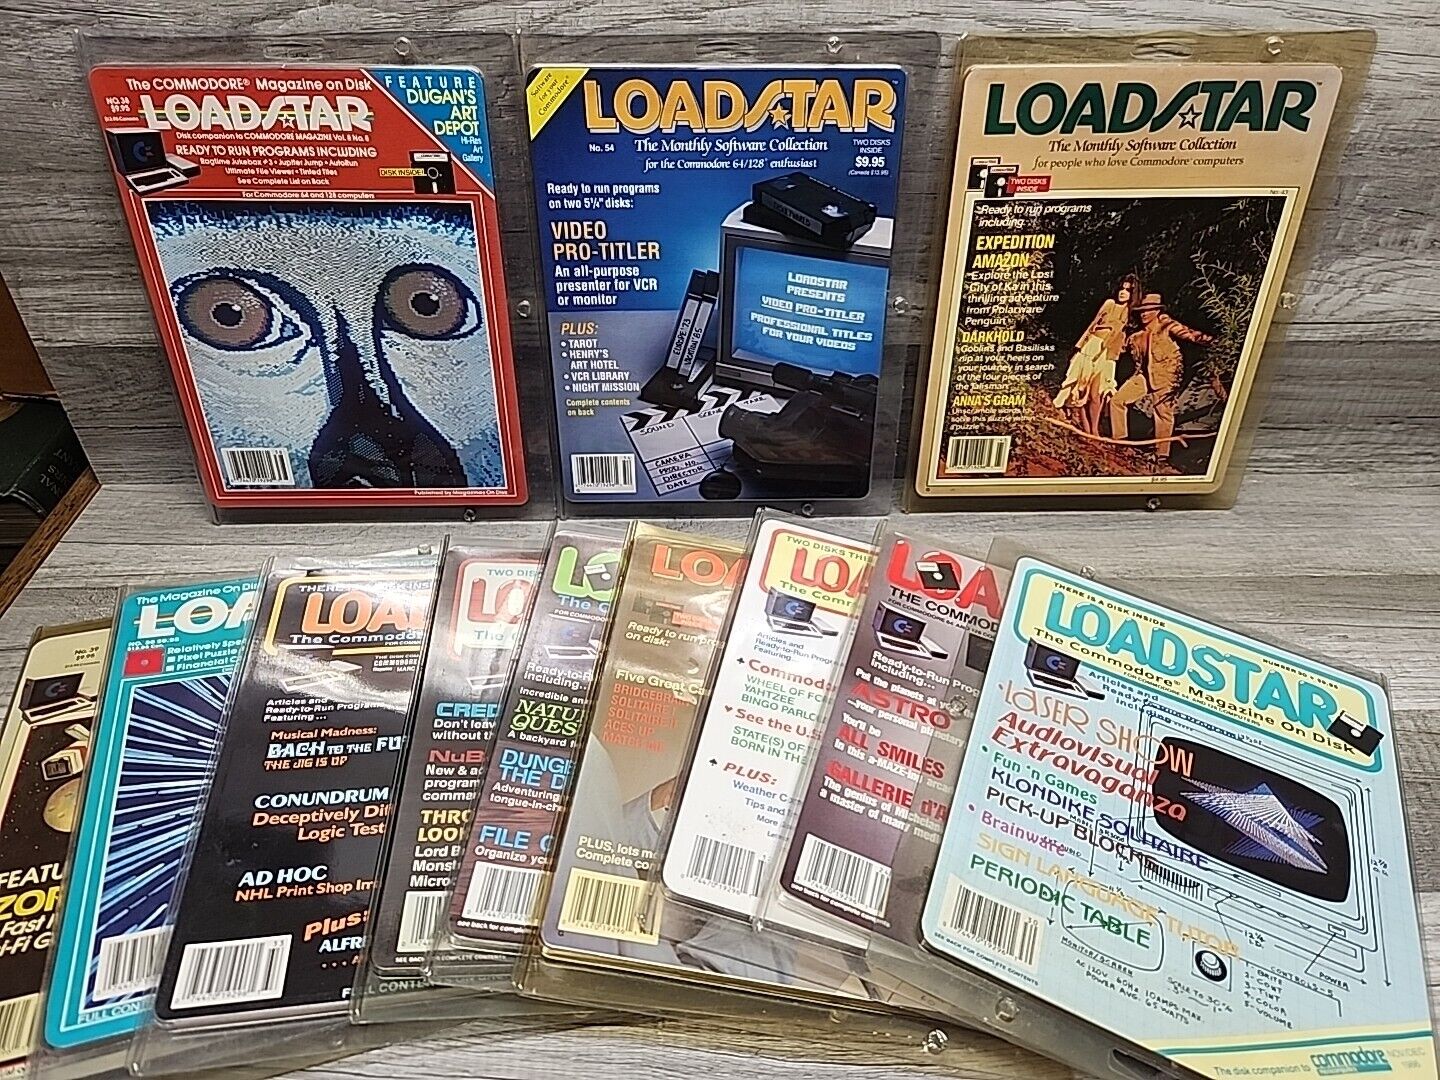 Lot of 12 Vintage 1980's Commodore 64 Loadstar Game Software Magazines On Disk